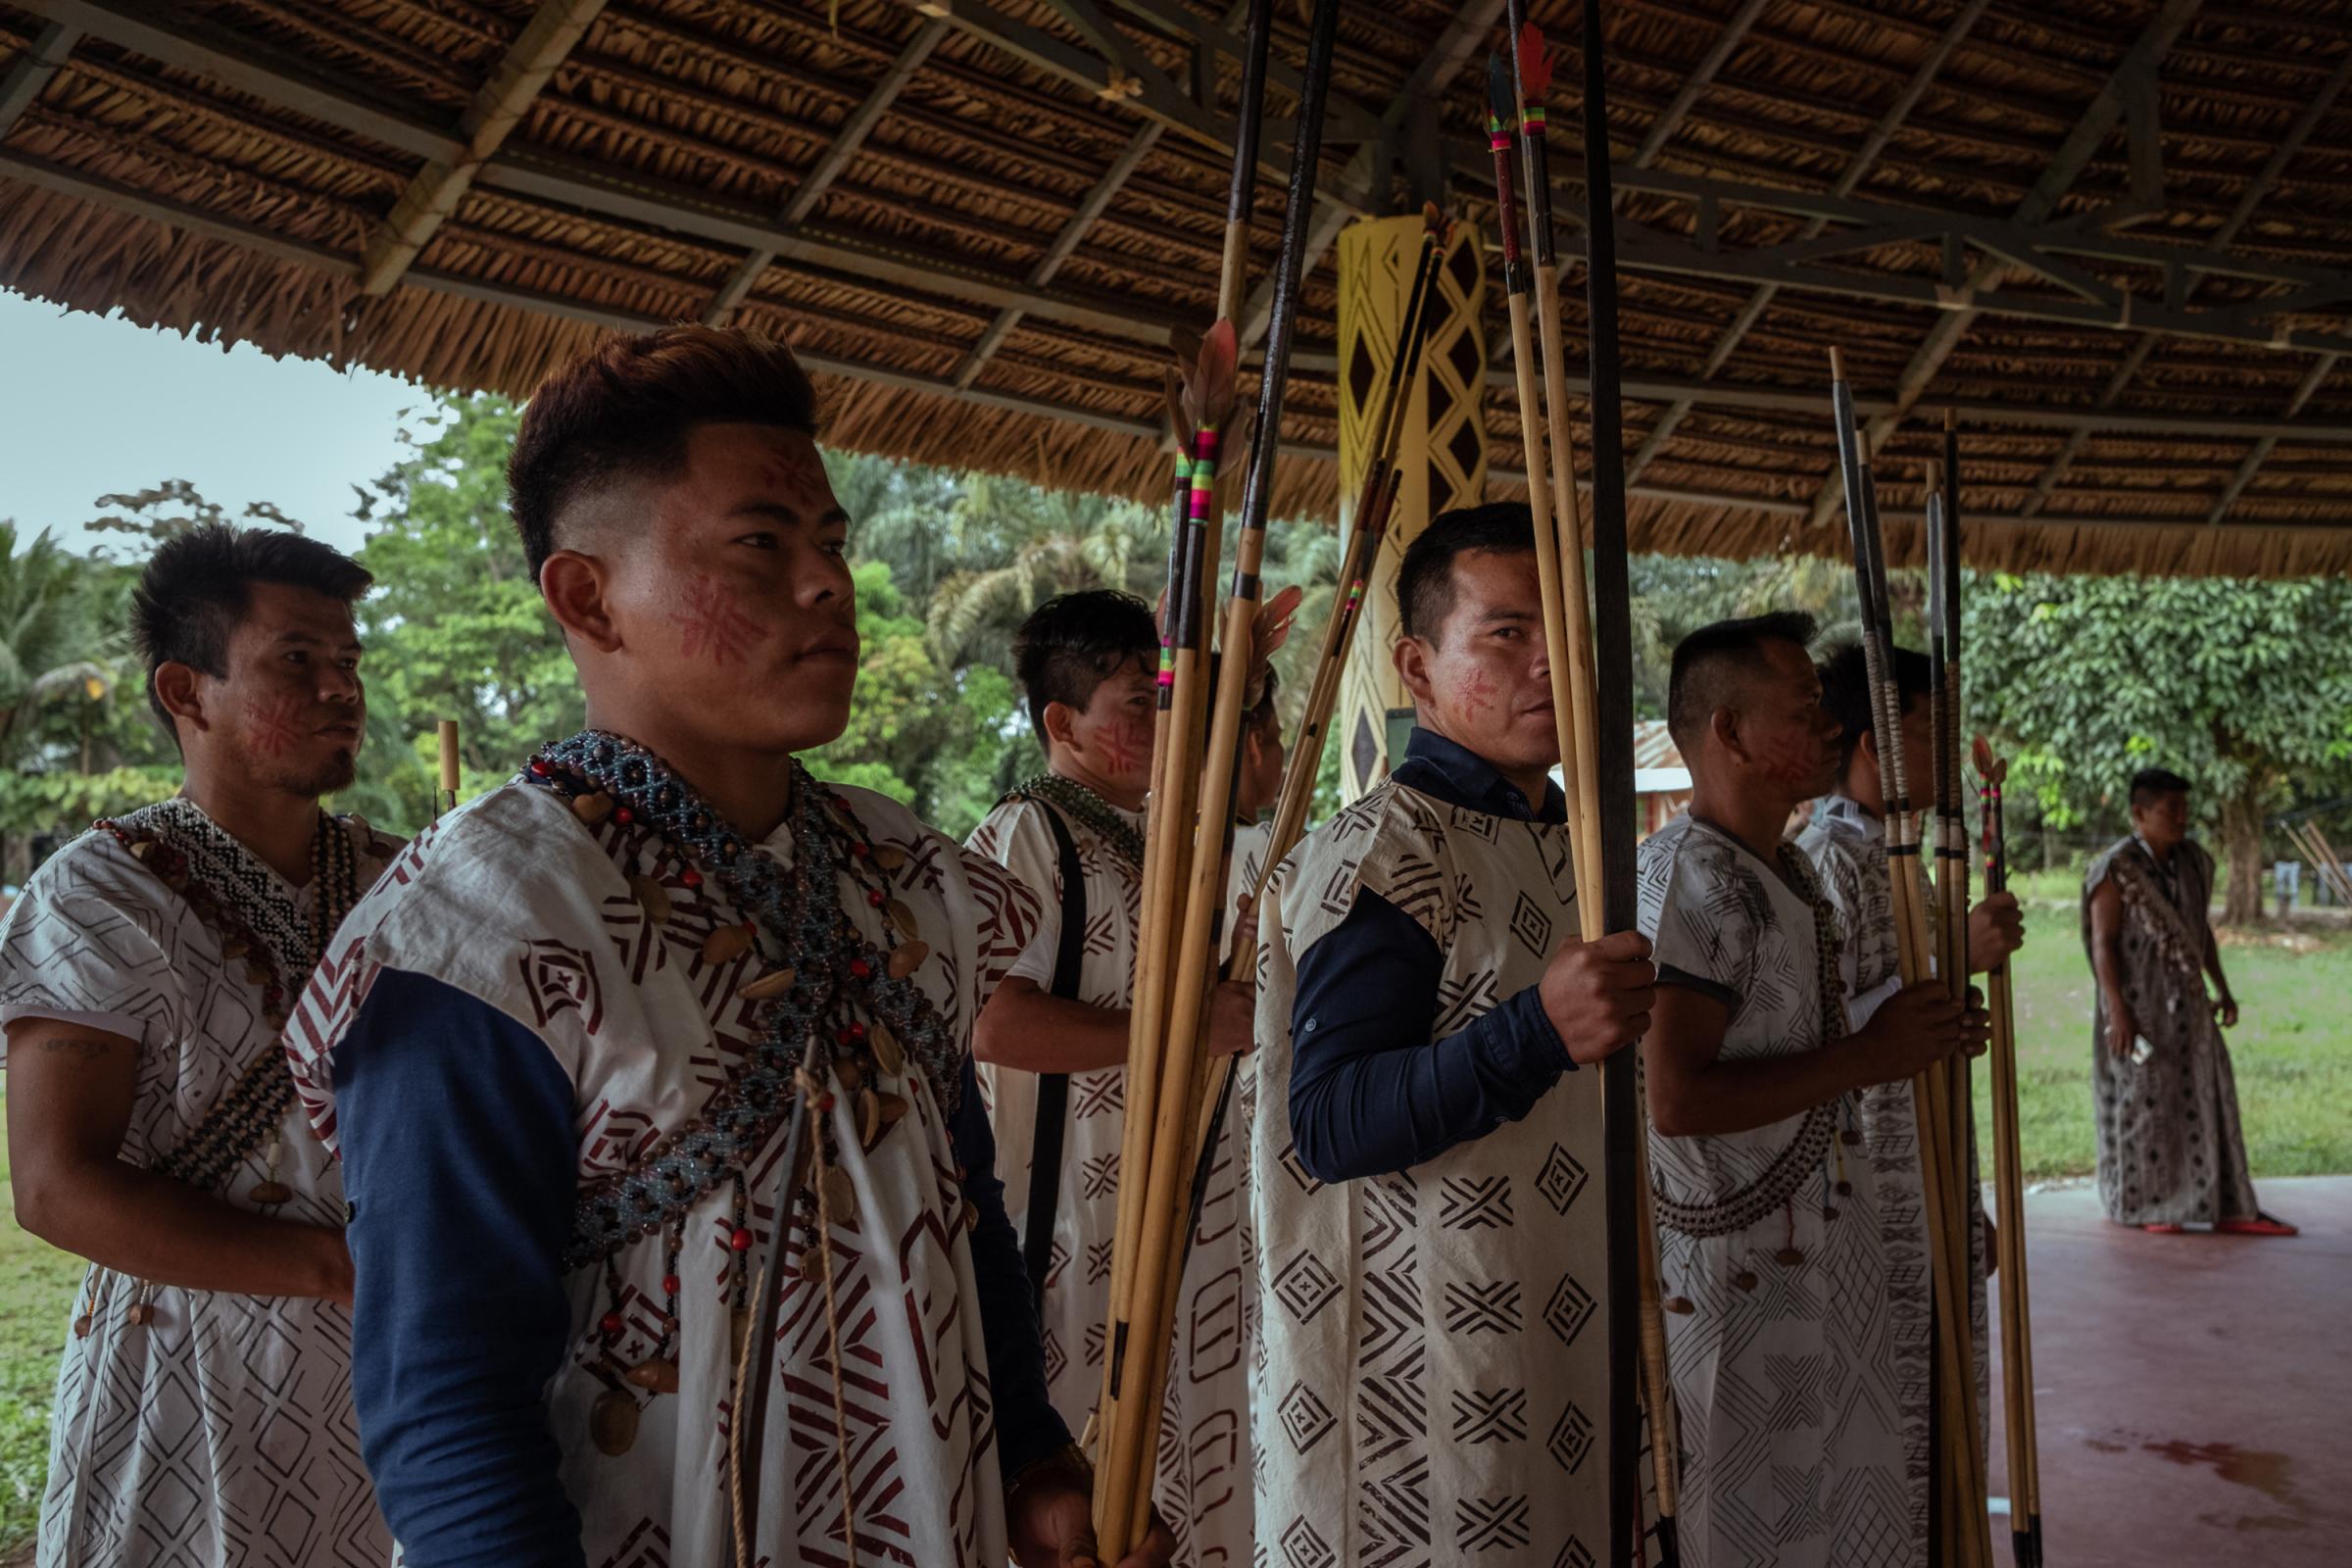 Kakataibo, voices from the forest - A group of Kakataibo men from the community of Yamino...